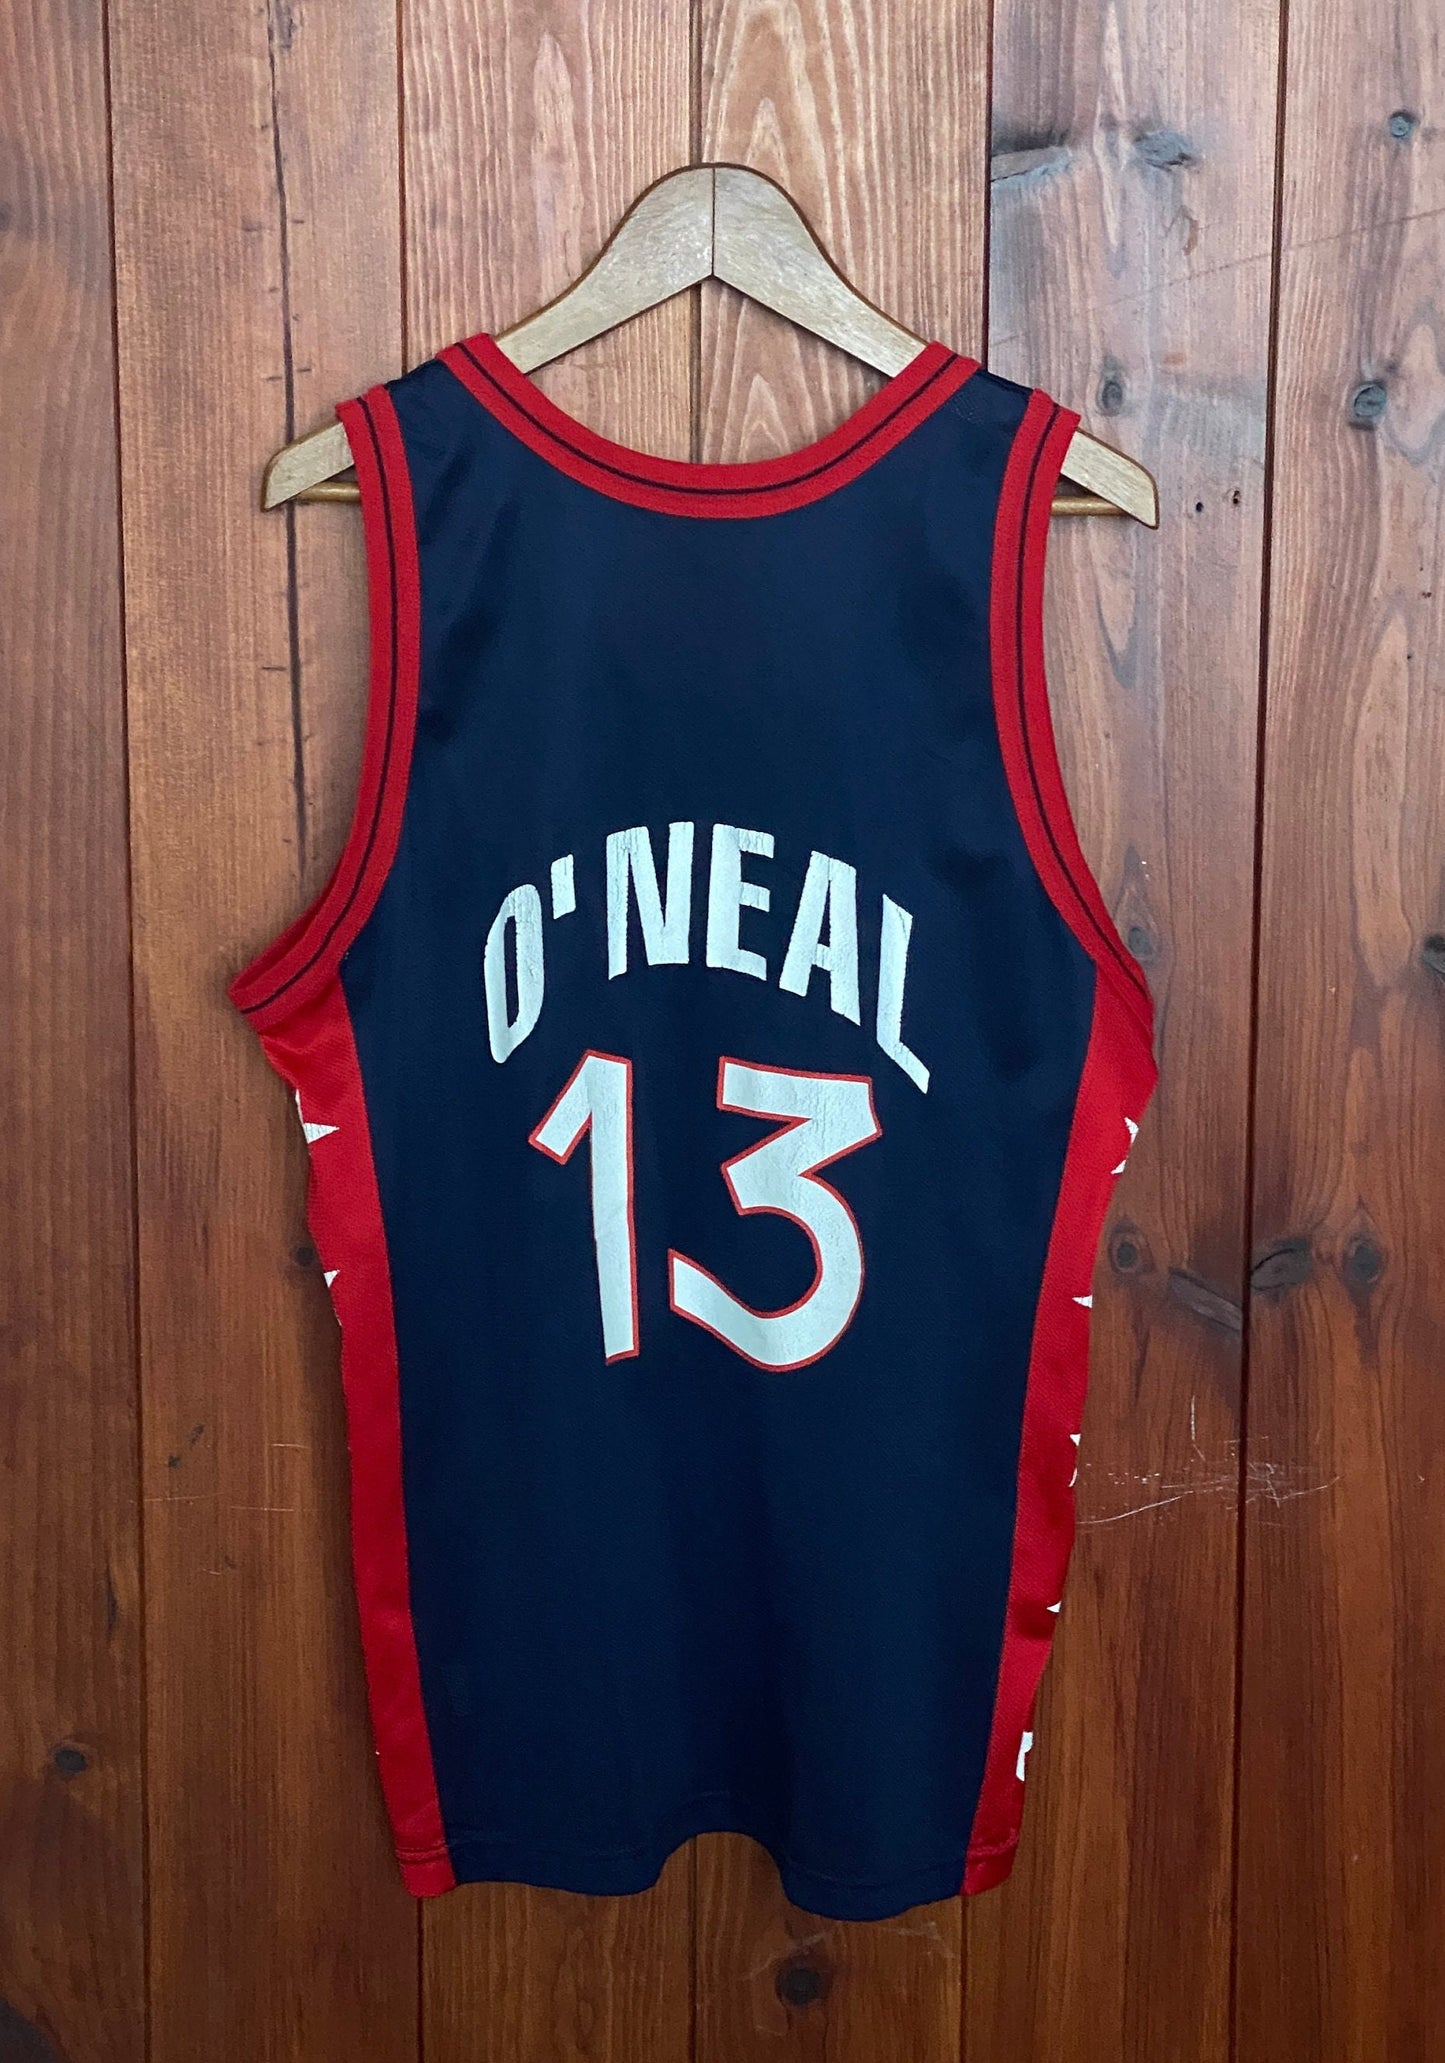 Vintage 90s NBA Champion USA Olympics Dream Team jersey, size 44, featuring Shaq O'Neal #13 - back view. Made in USA.